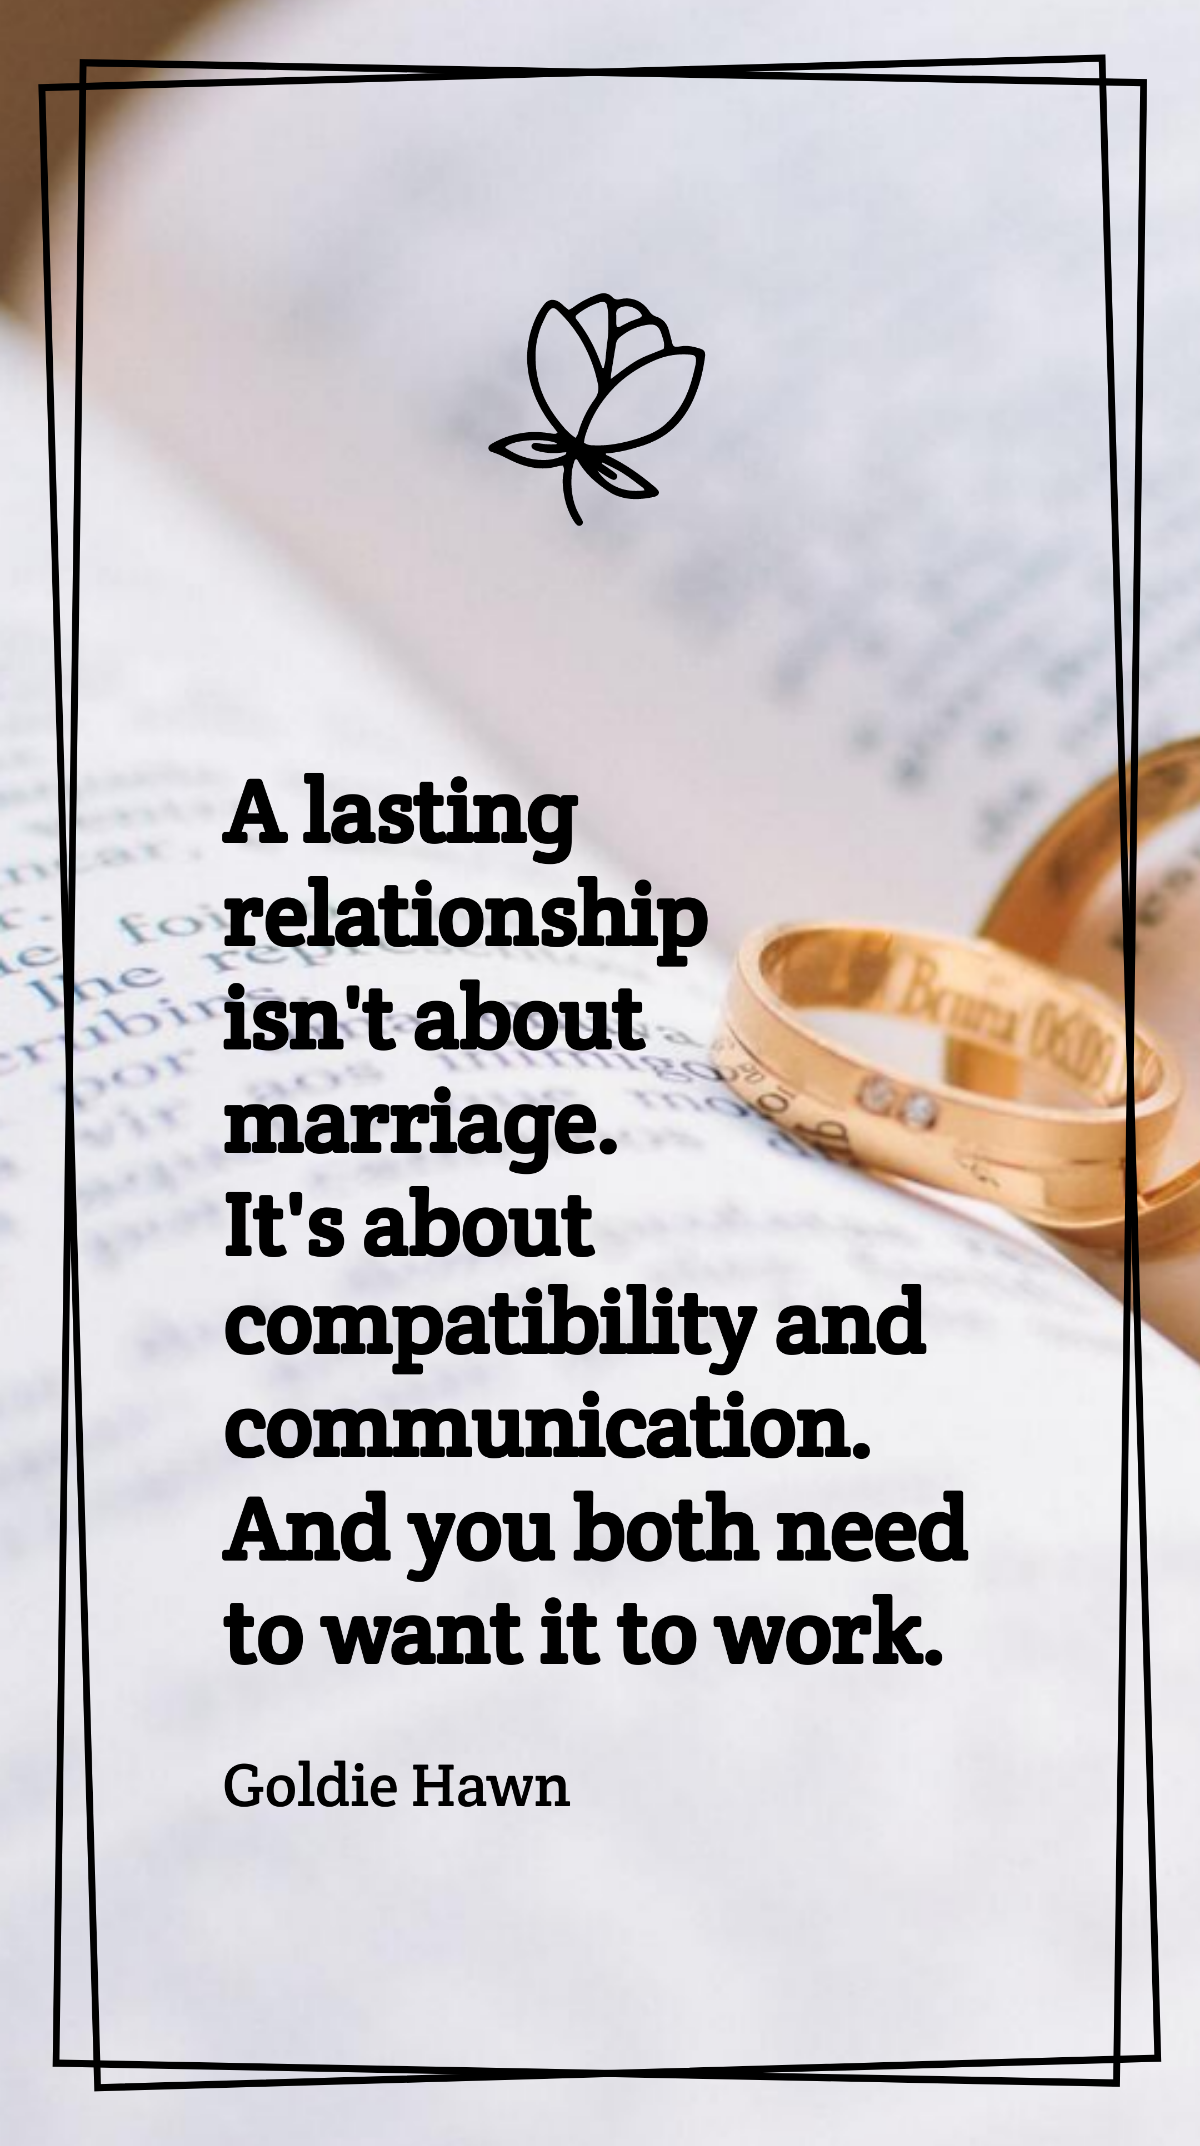 Goldie Hawn - A lasting relationship isn't about marriage. It's about compatibility and communication. And you both need to want it to work. Template